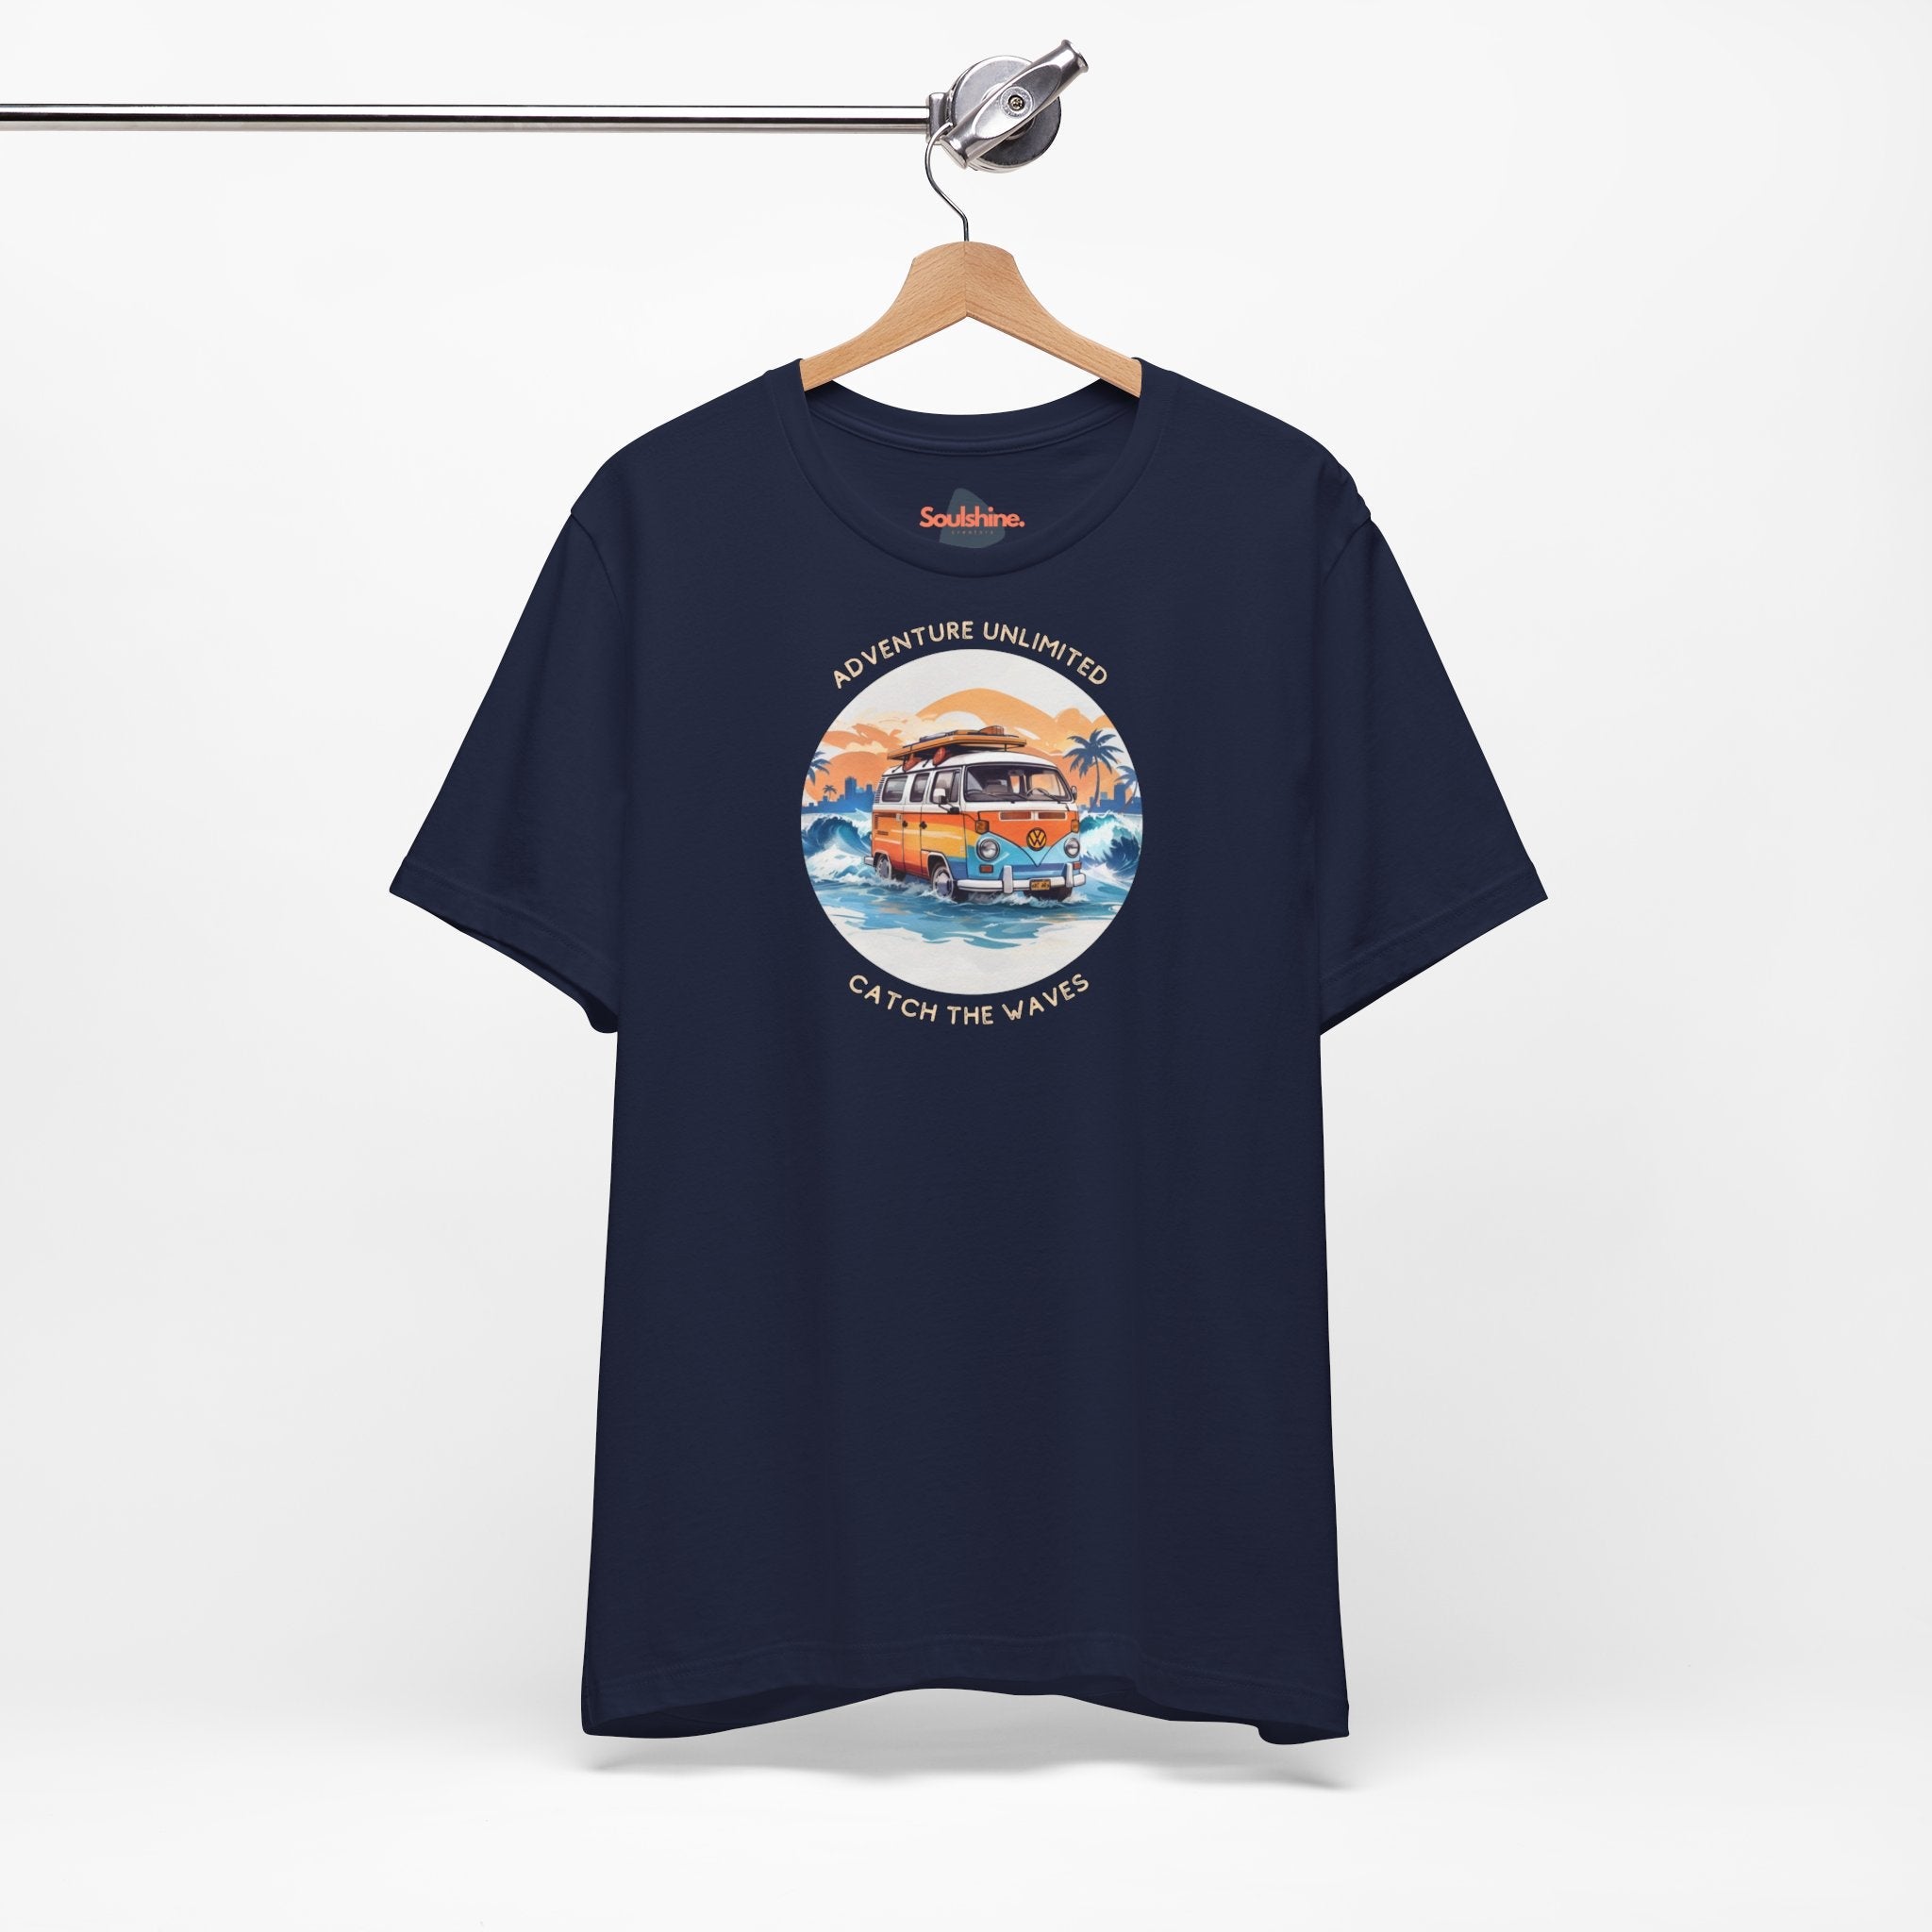 Adventure Unlimited navy t-shirt with ’Soulshinecreators’ printed on it